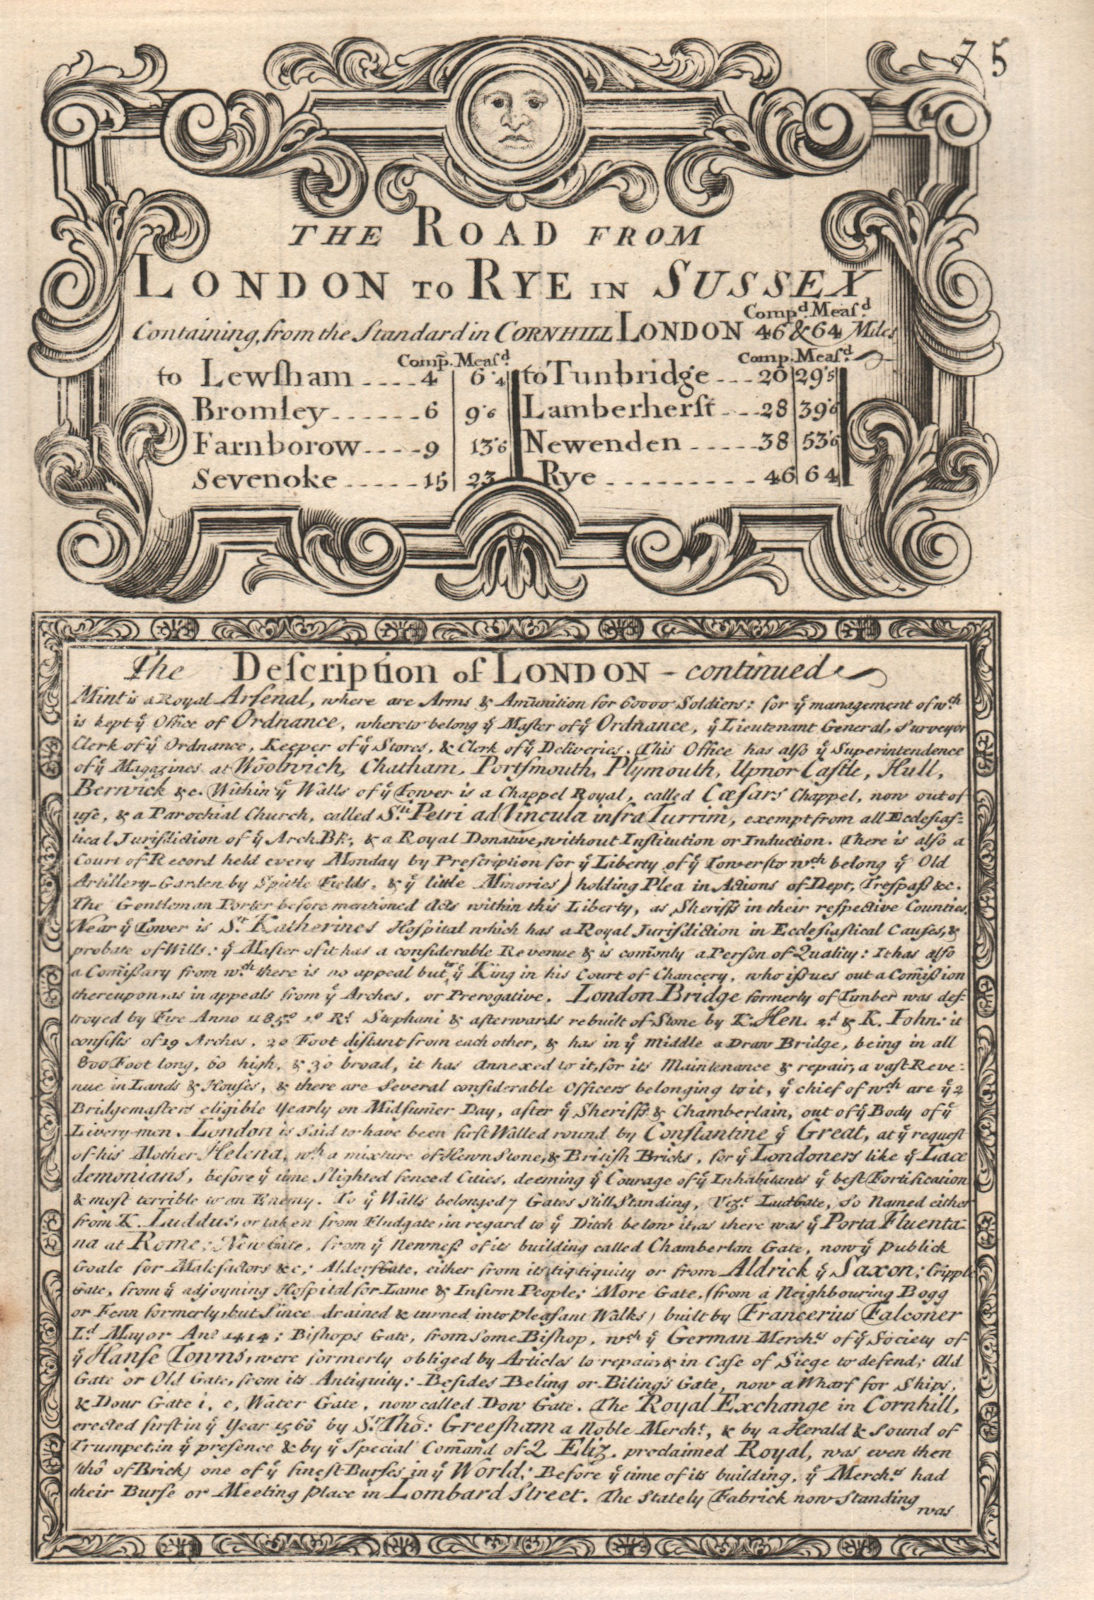 The Road from London to Rye in Sussex. The Description of London cont'd 1753